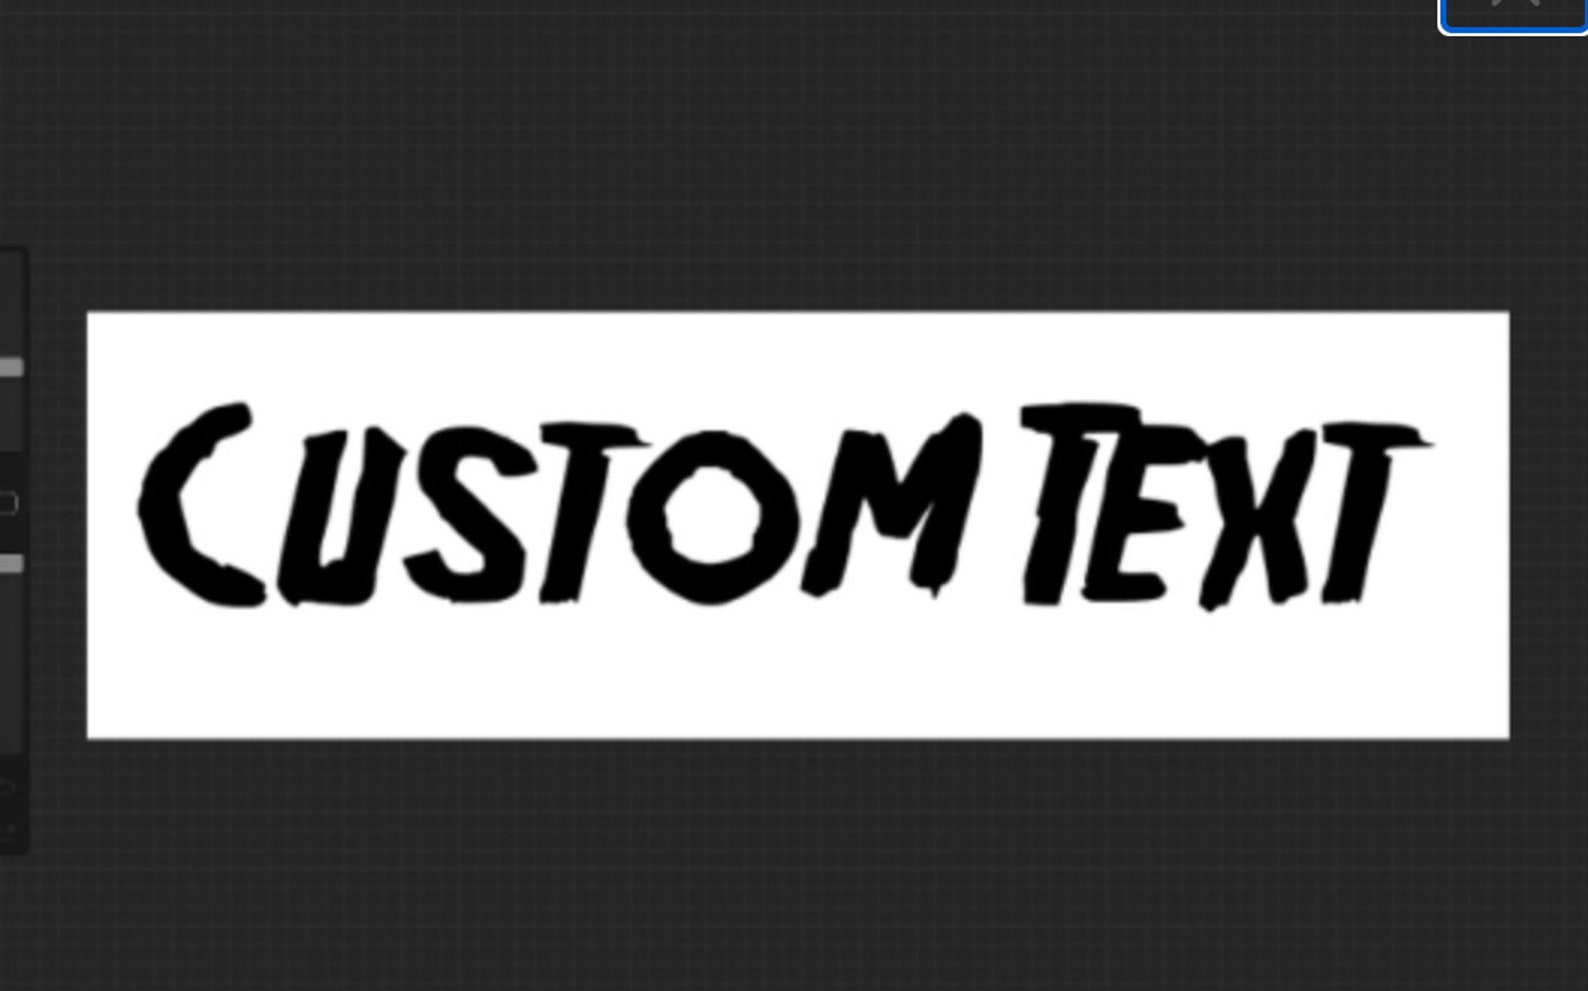 Custom Text in Friday the 13th font Decal | Etsy